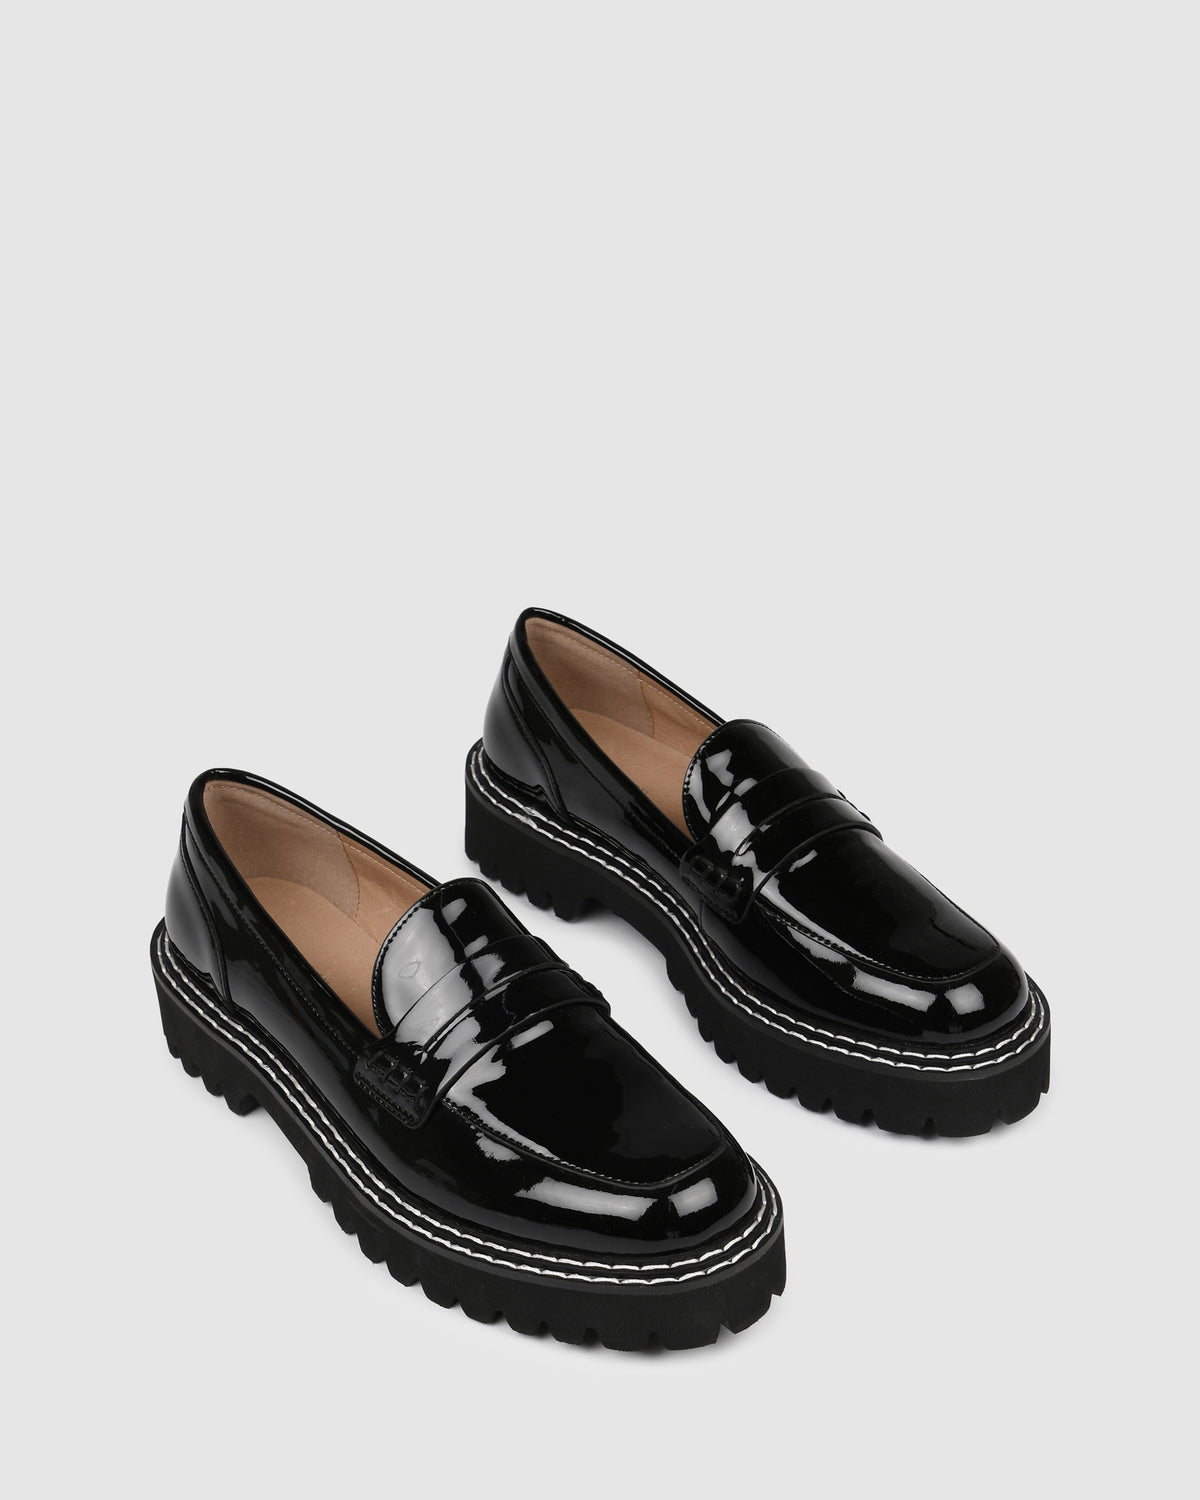 UNITY LOAFERS BLACK PATENT